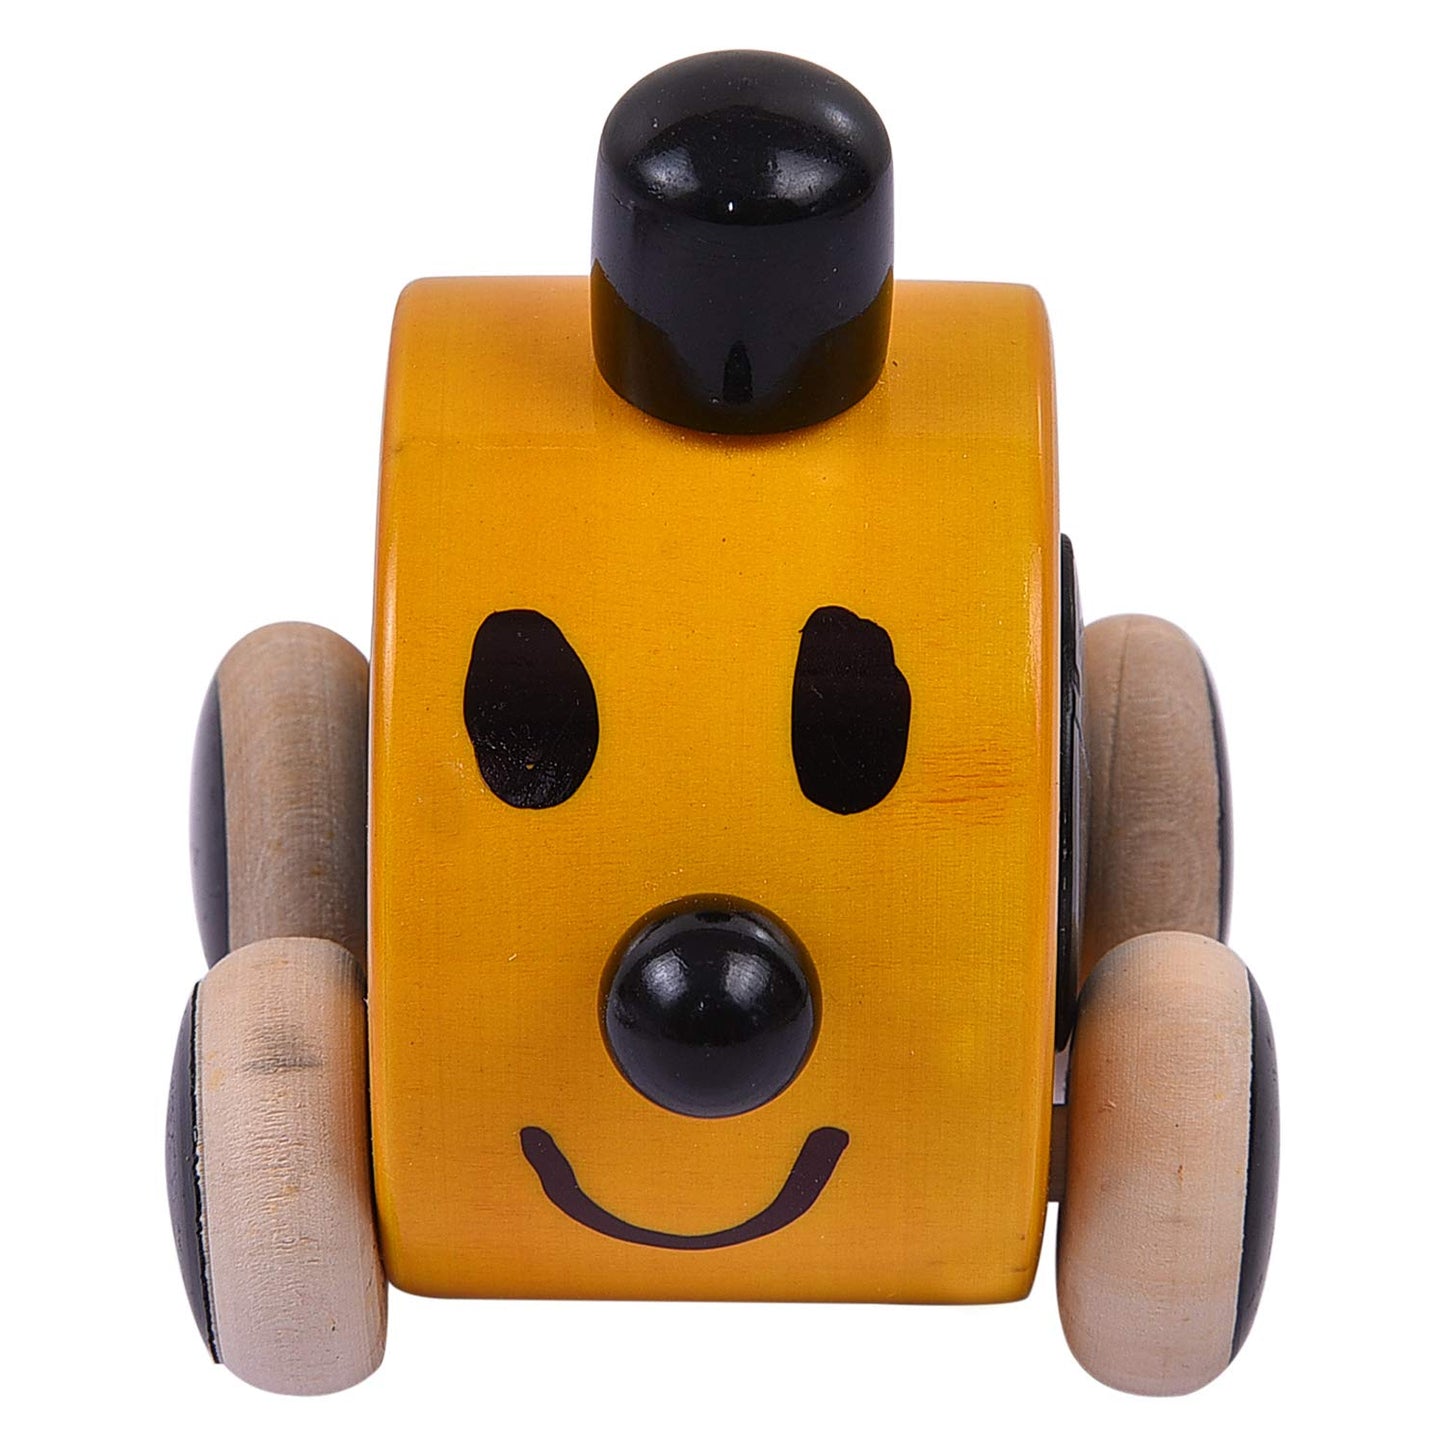 Wooden Vehicle Toys, Wooden Vehicles, Wooden Nano Car, Organic Material Car (made In India)